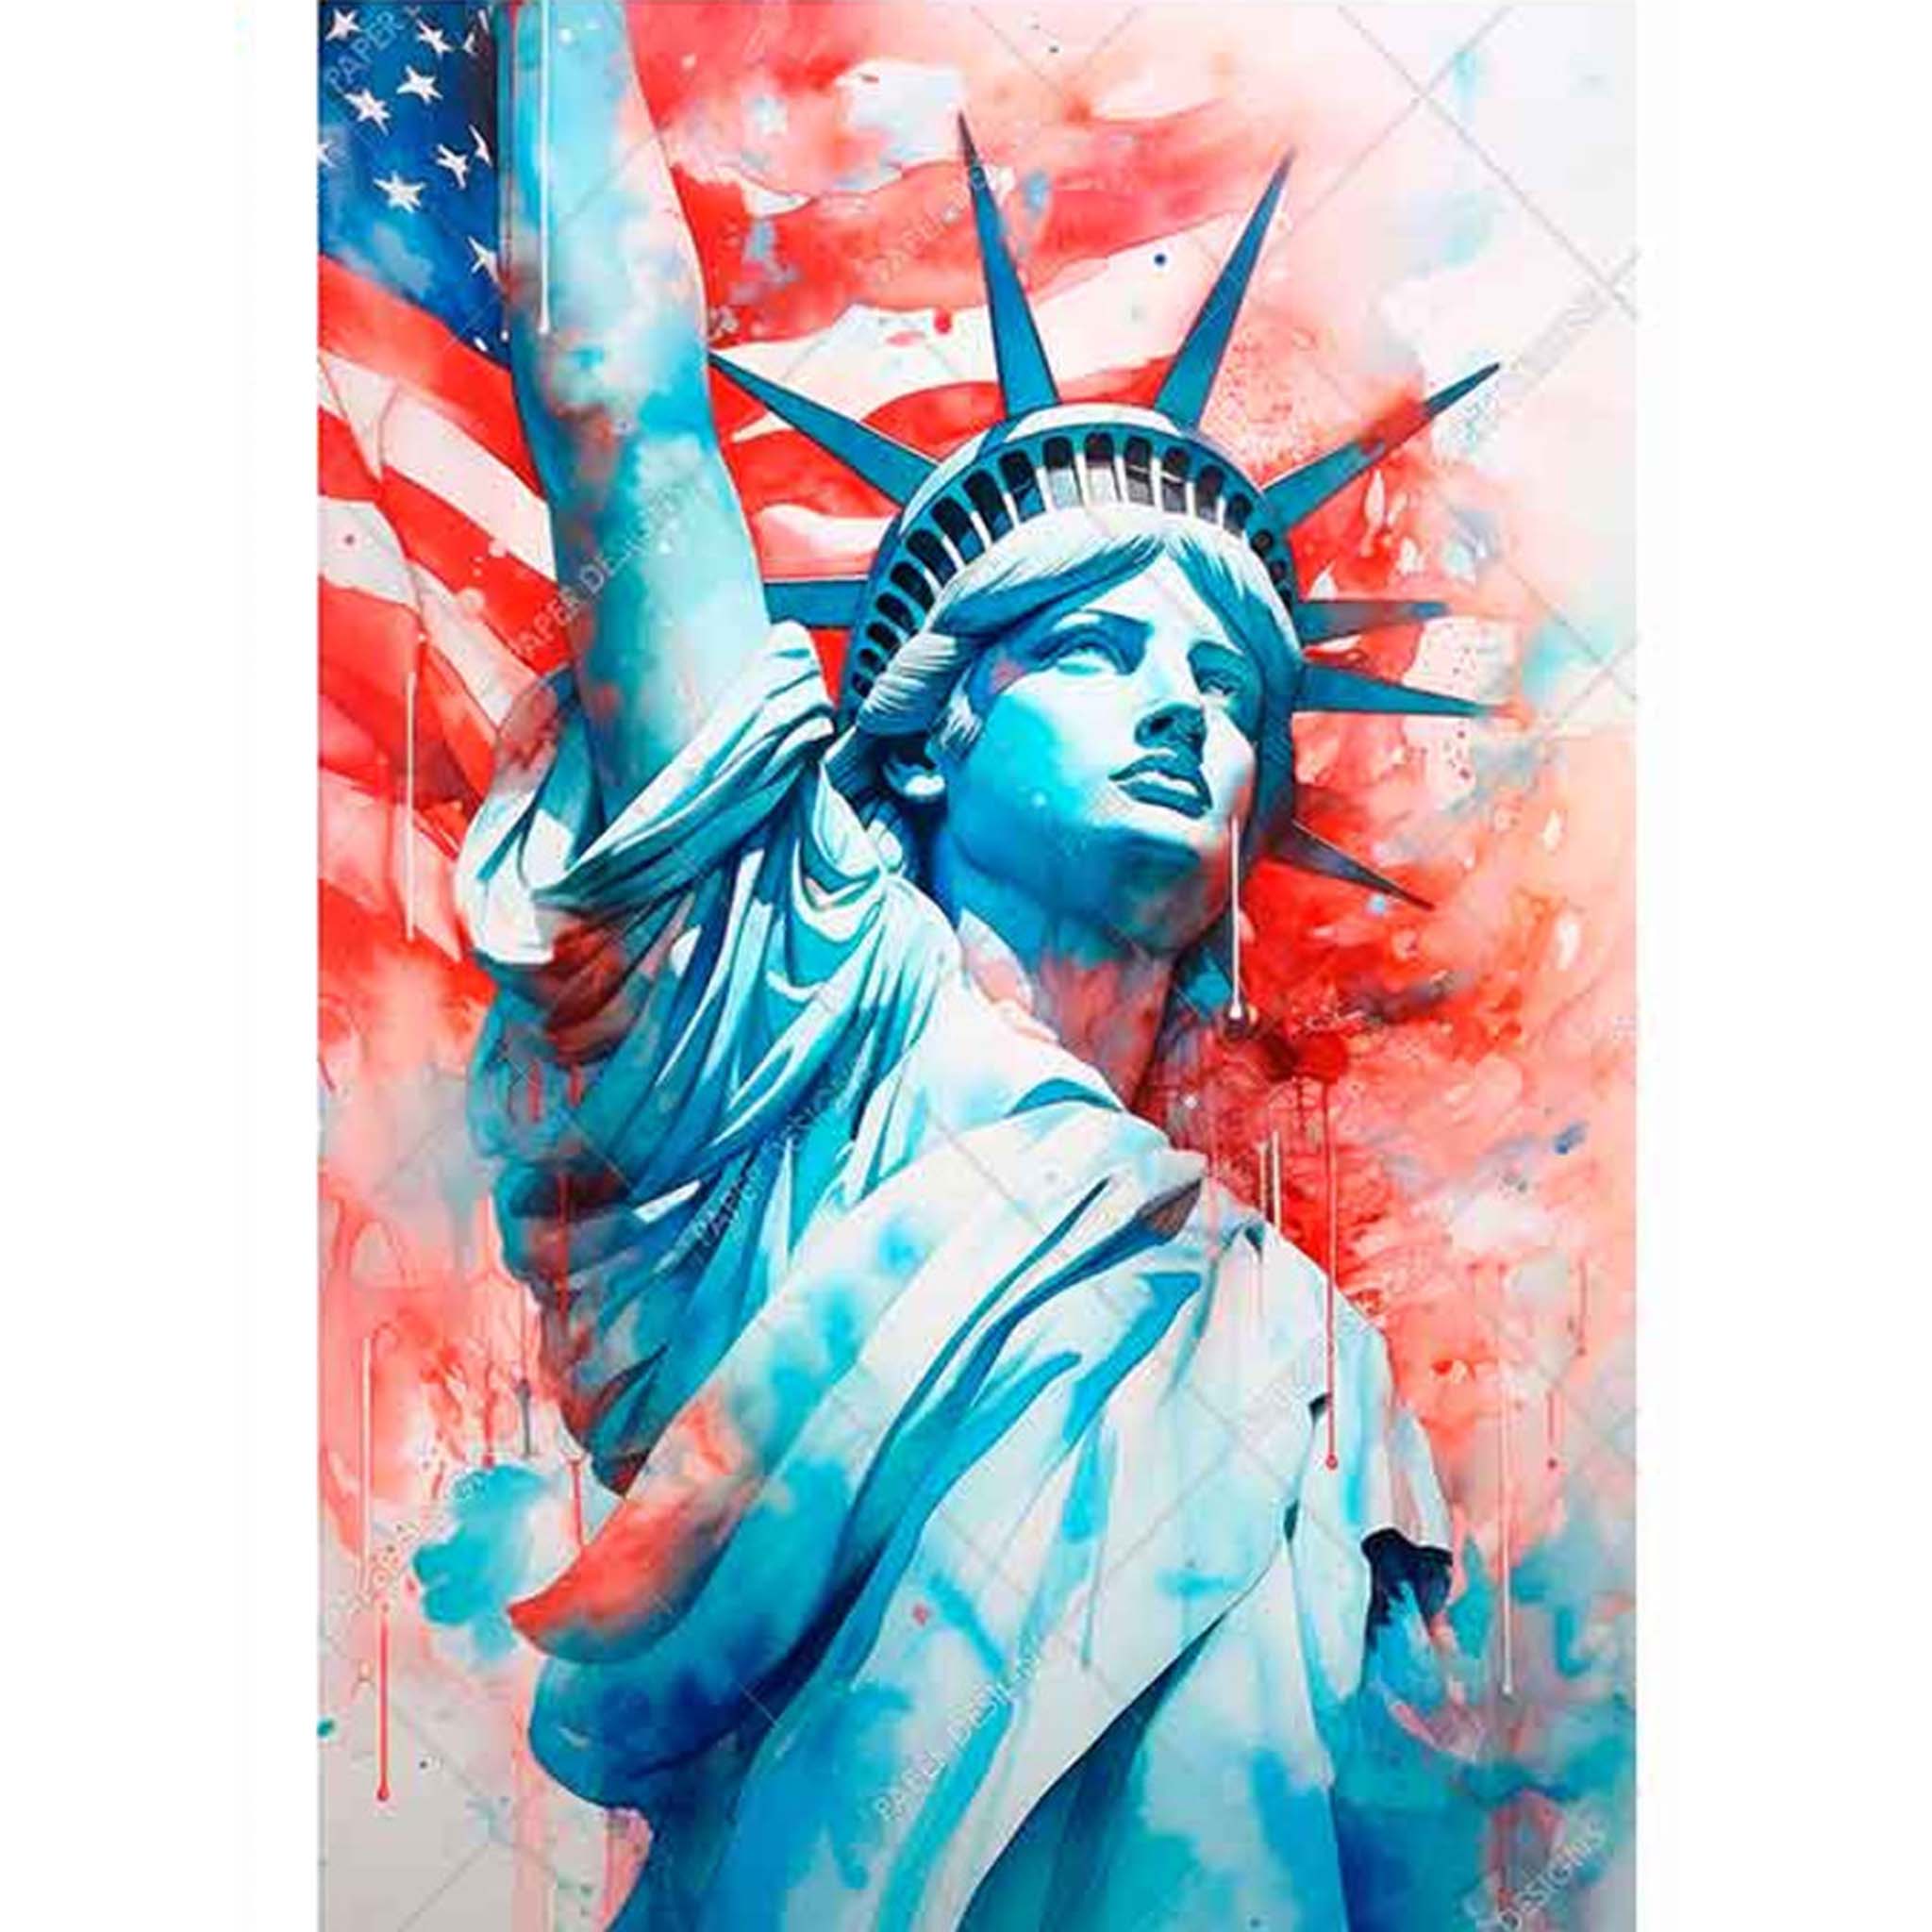 A4 rice paper design that features the iconic Statue of Liberty, proudly standing in front of a dripping painting of the American flag. White borders are on the sides.